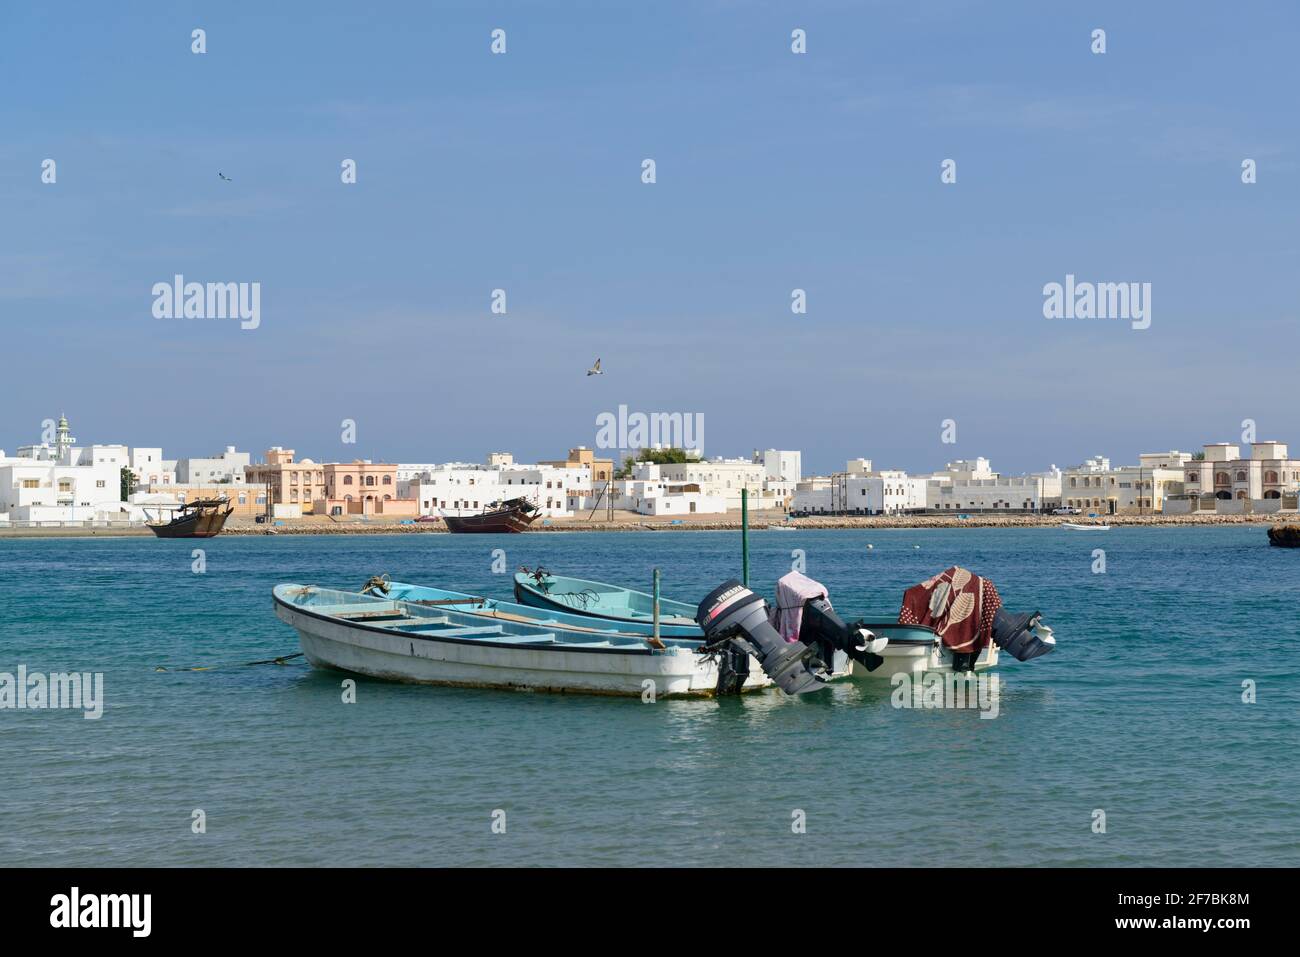 Fishing boats and dhows in the lagoon between the village Aylah (that you can see here) and the city Sur, Oman. Stock Photo